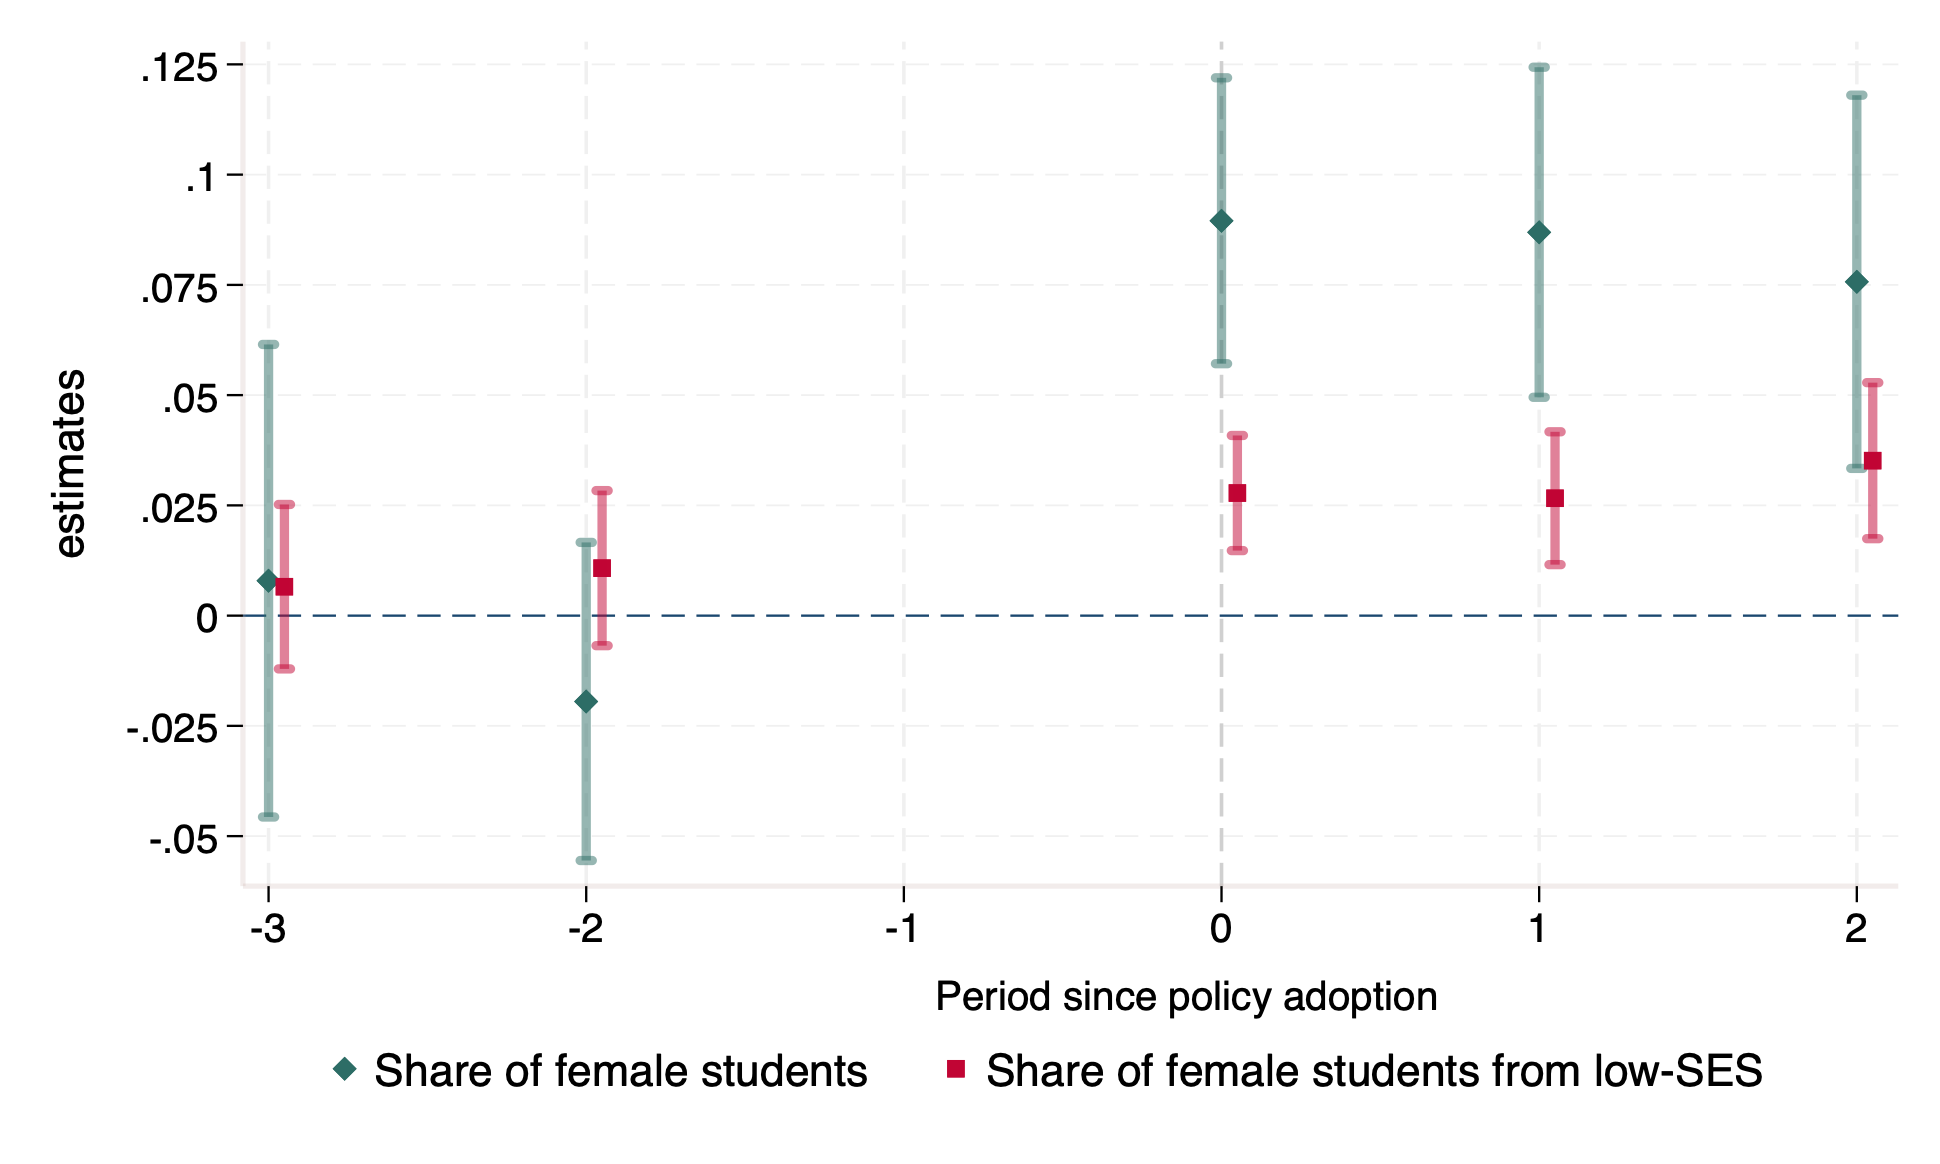 Quota increased the share of female students and the share of female students from low-SES